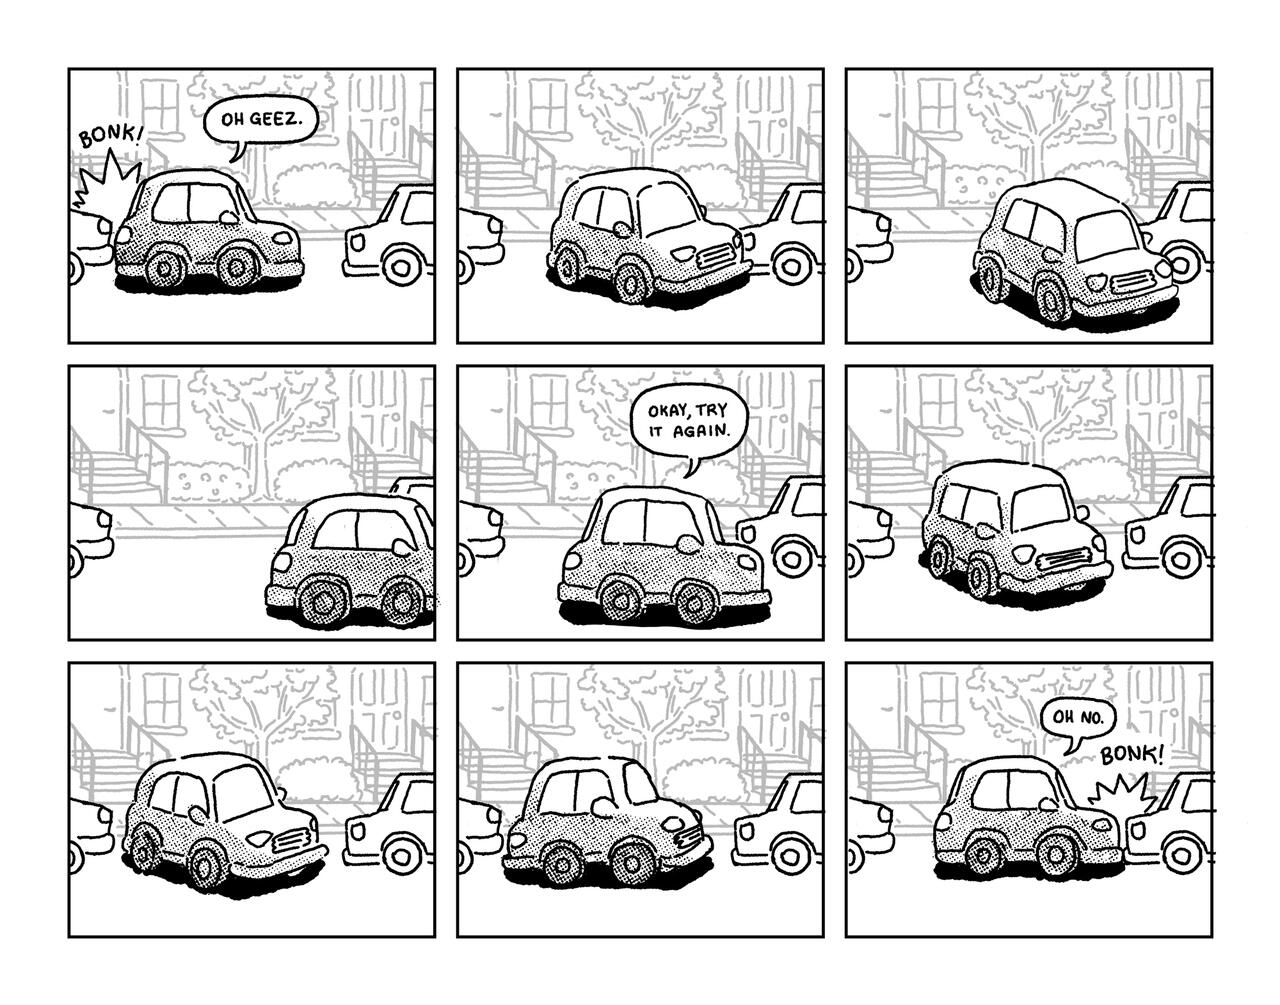 Parallel parking comic by Bailey Gross